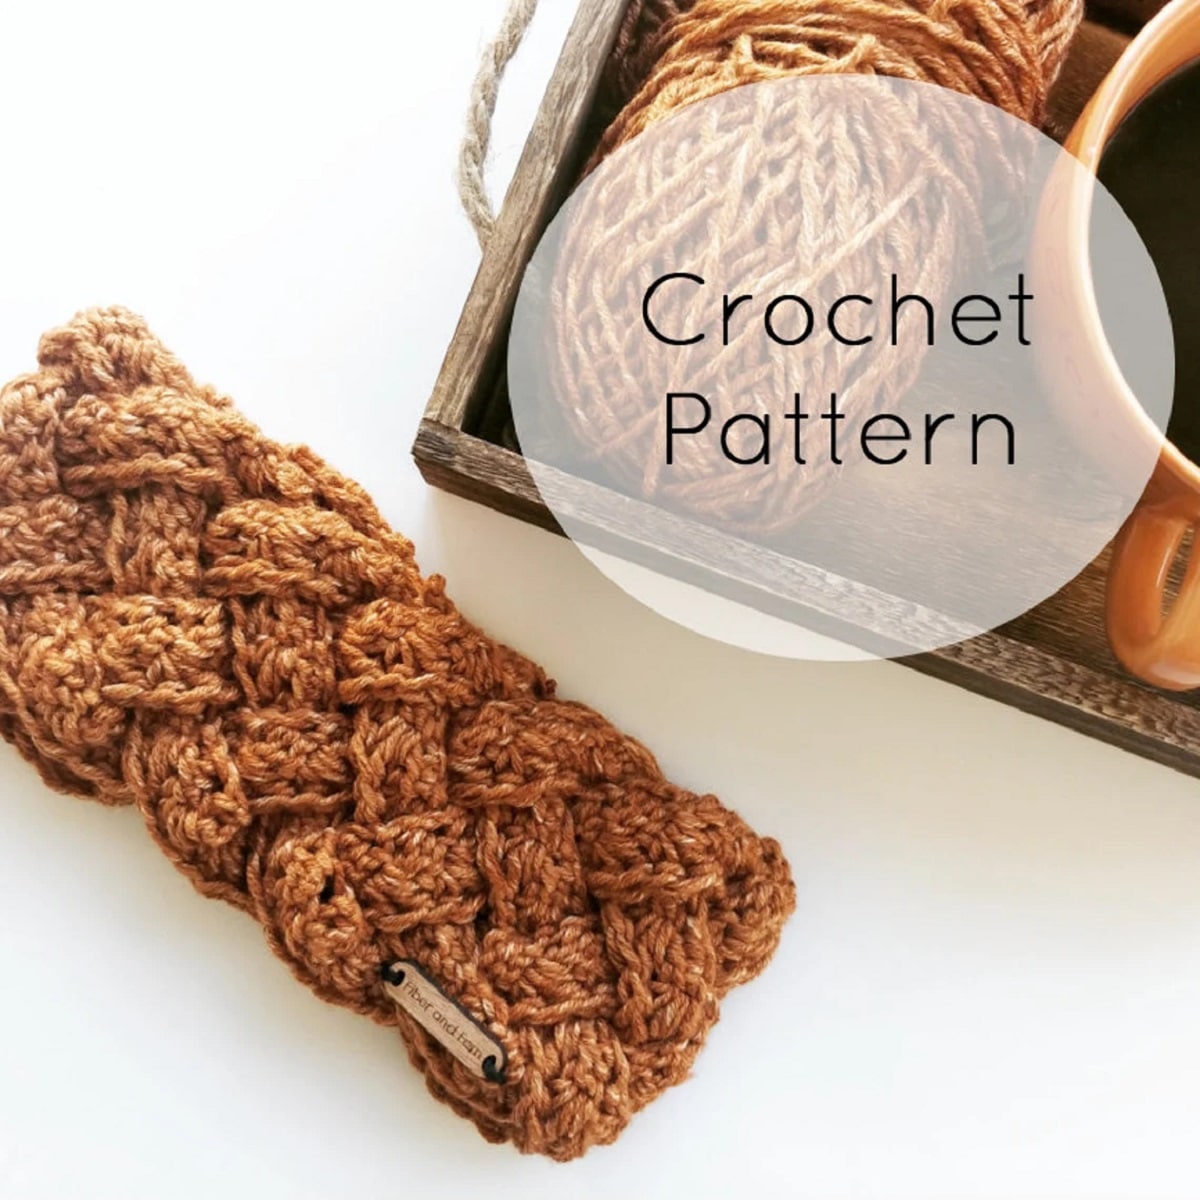 A tan colored crochet headband using a chunky braided design next to a wooden tray with yarn and a cup of coffee on.